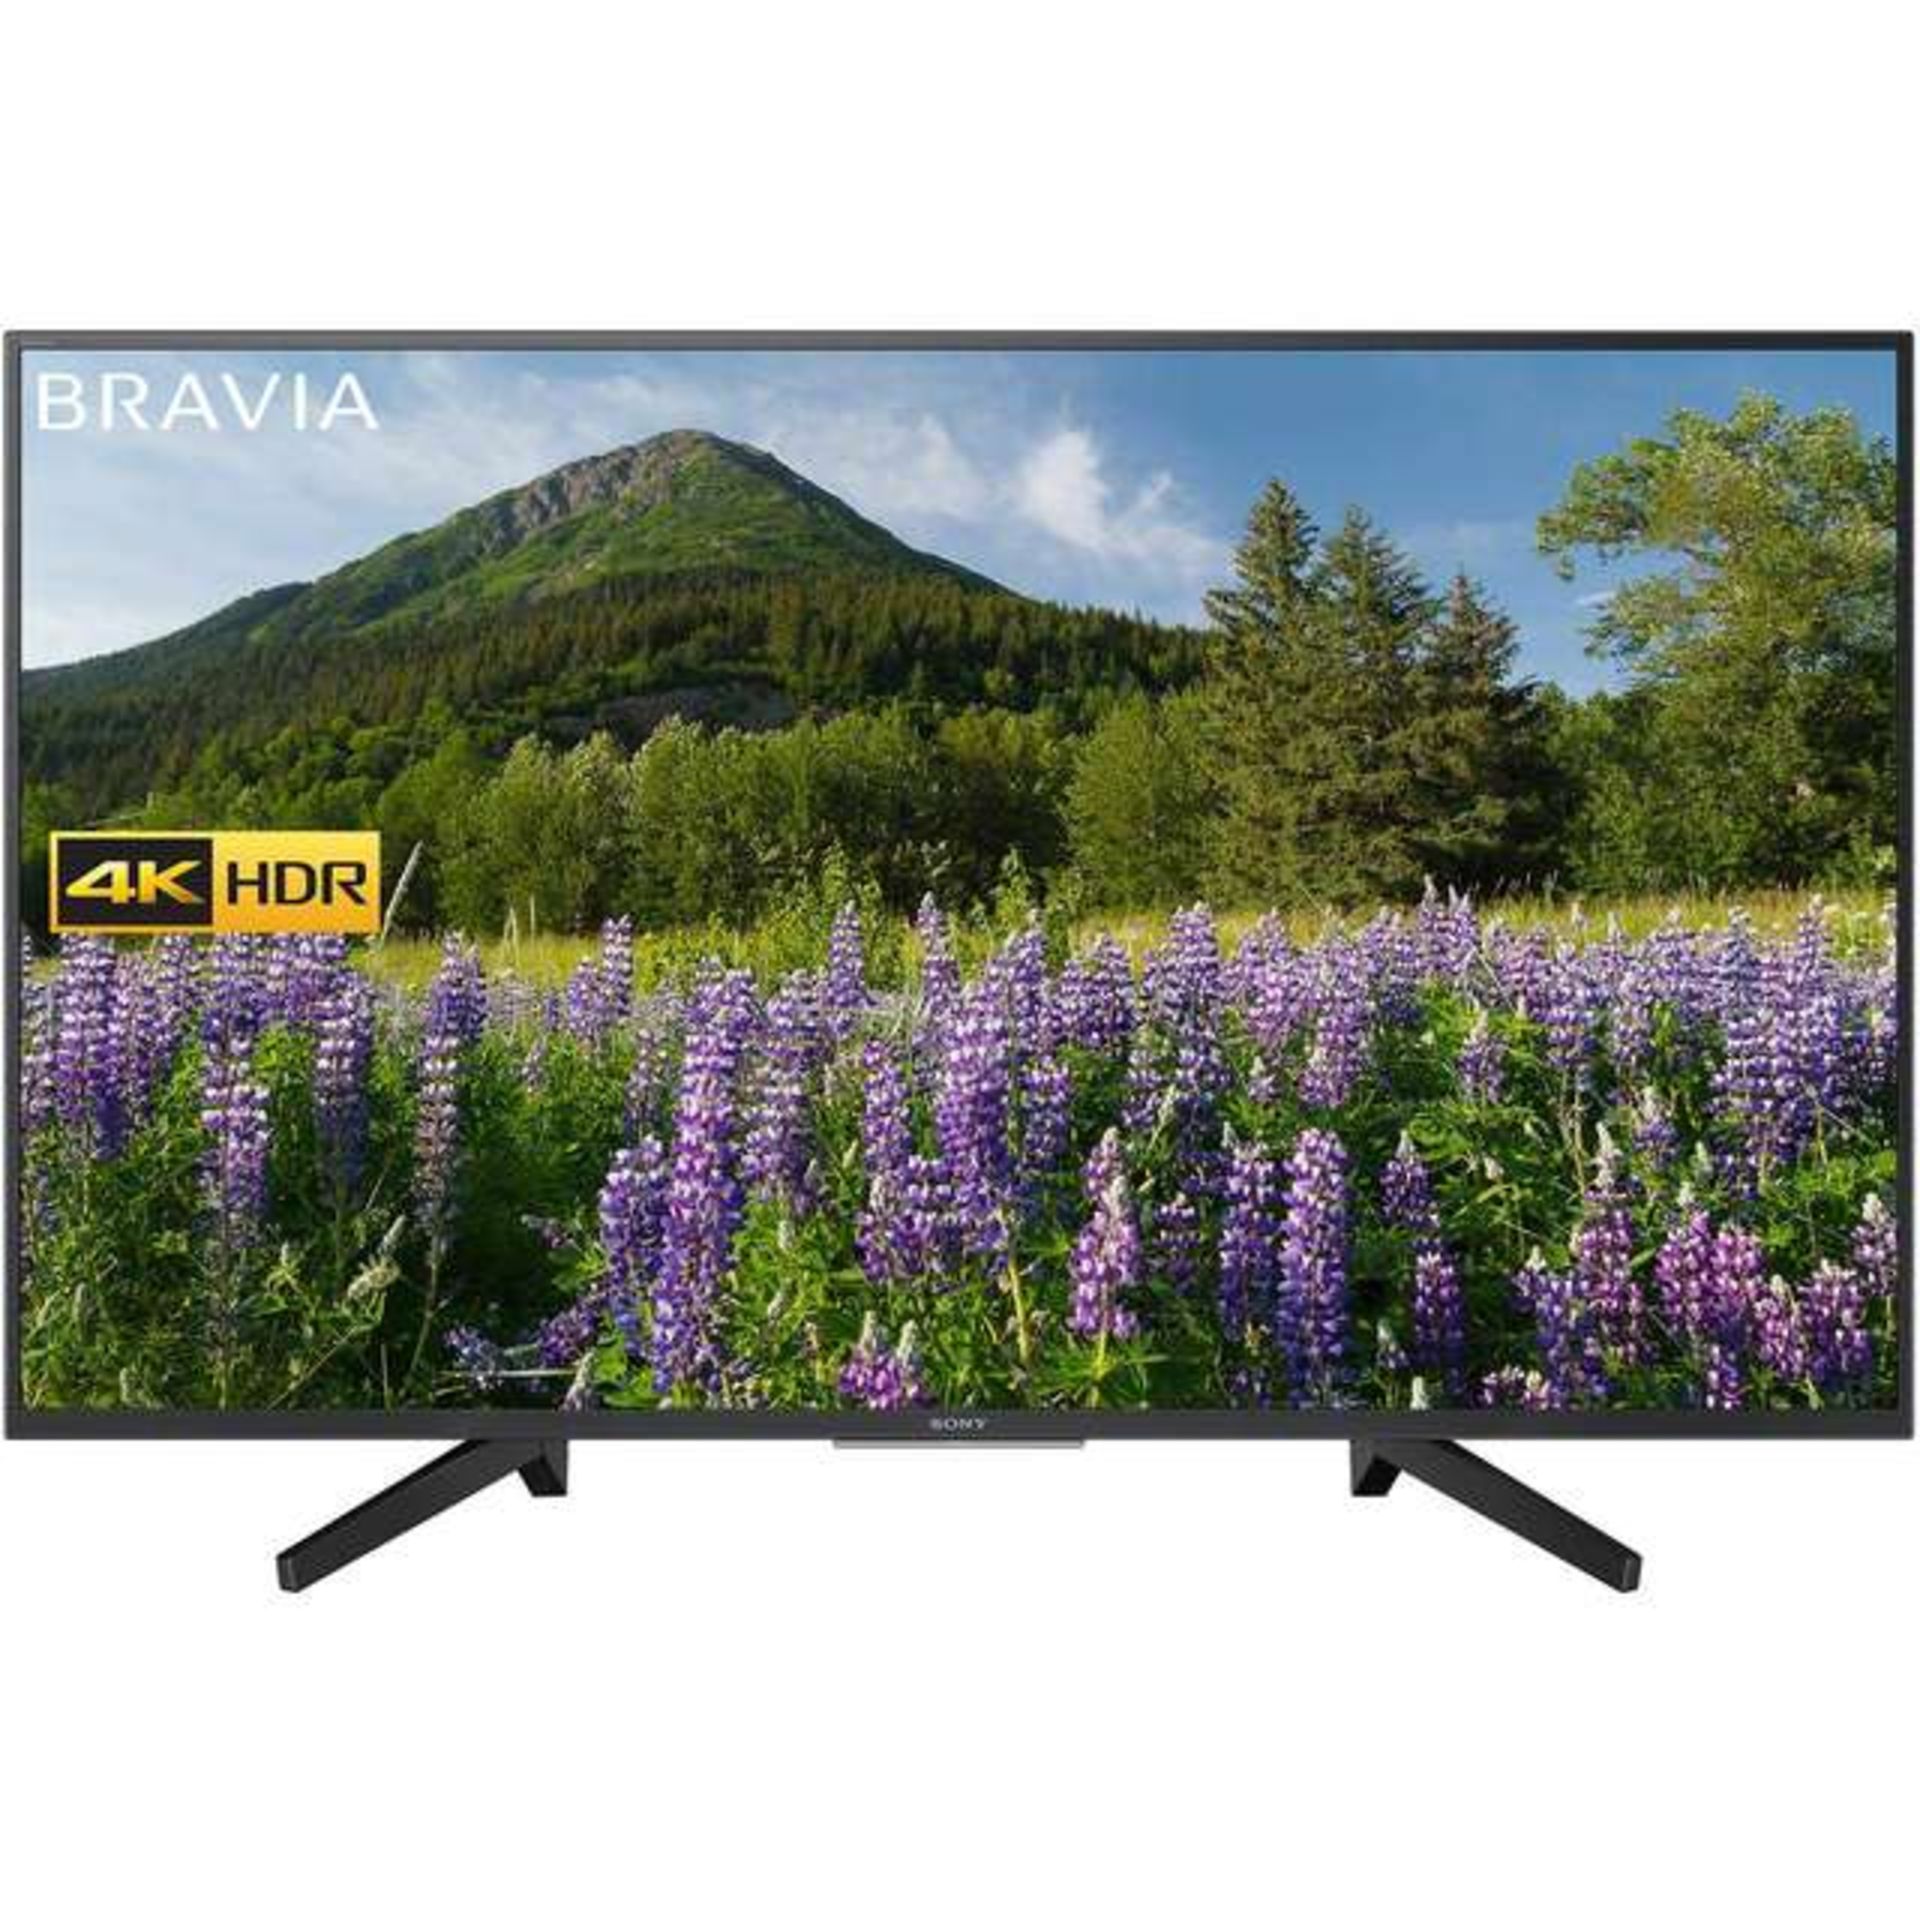 1 BOXED SONY BRAVIA 55" KD-55XF7003BU 4K ULTRA HD LED SMART TV WITH STAND & REMOTE RRP Â£799 (